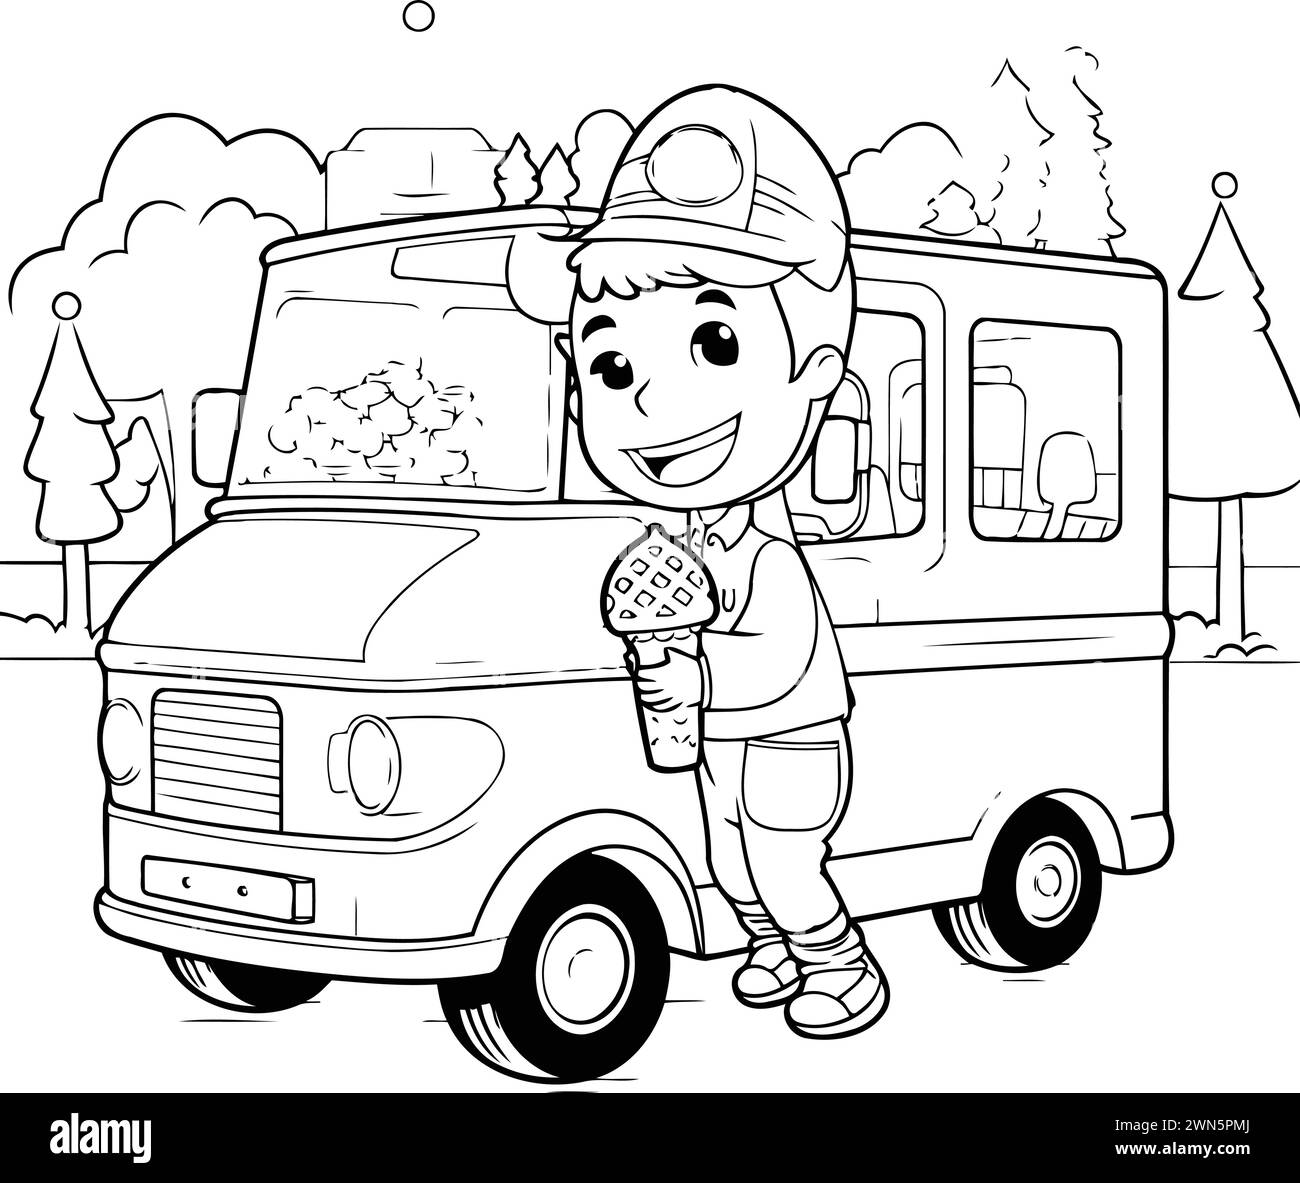 Black and White Cartoon Illustration of a Fast Food Truck or Food Truck Driver with Ice Cream Coloring Book Stock Vector